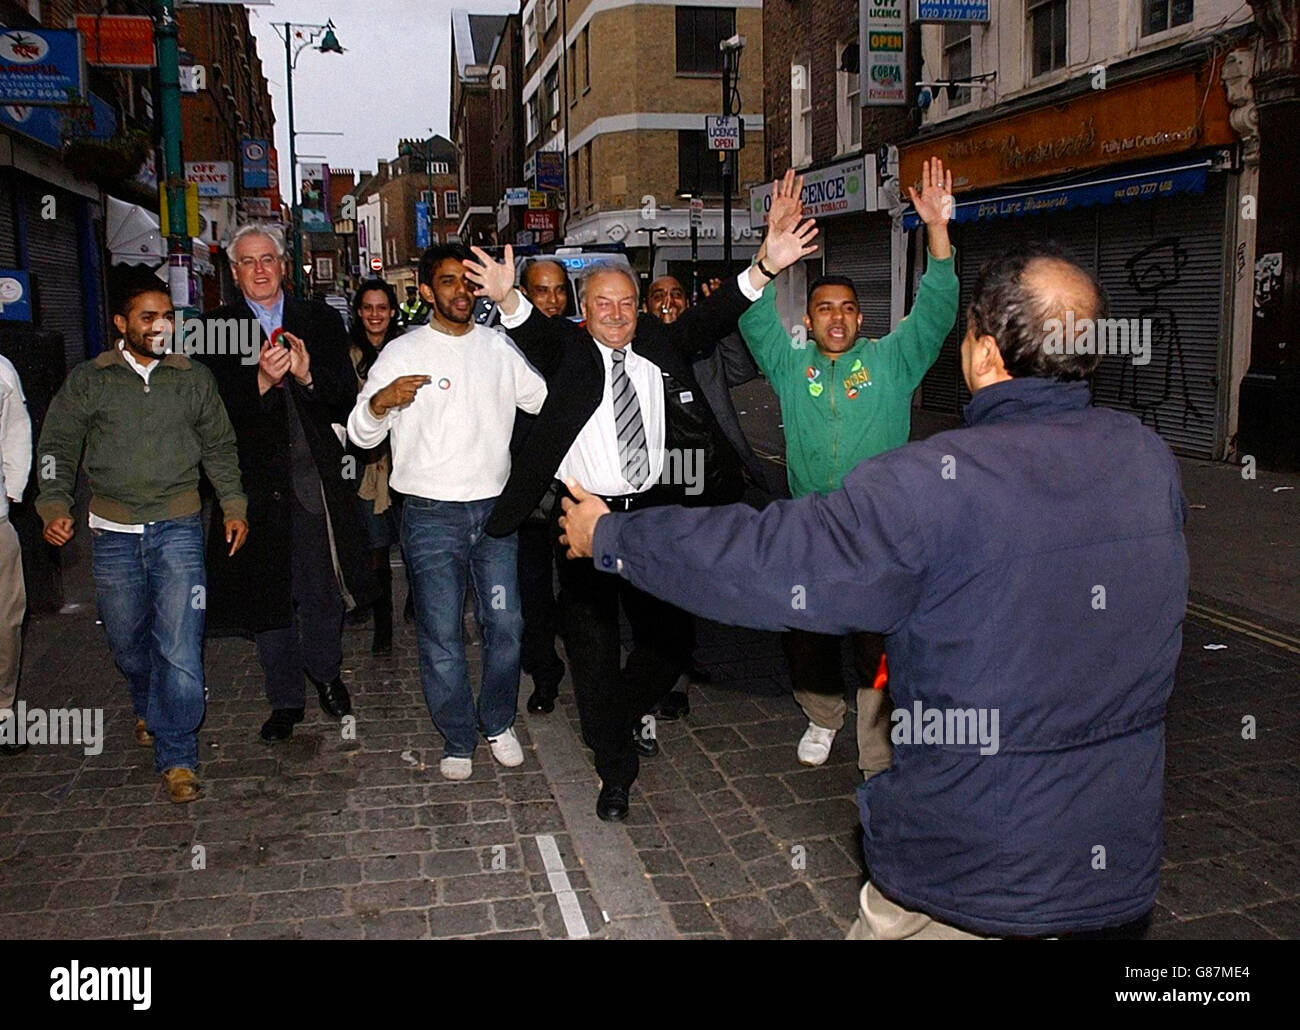 Former Labour MP and new Respect MP for Bethnal Green and Bow, George Galloway (centre), greets supporters in London's Brick Lane. Galloway beat previous Labour MP Oona King for the seat which had been held by Labour since 1945. Stock Photo